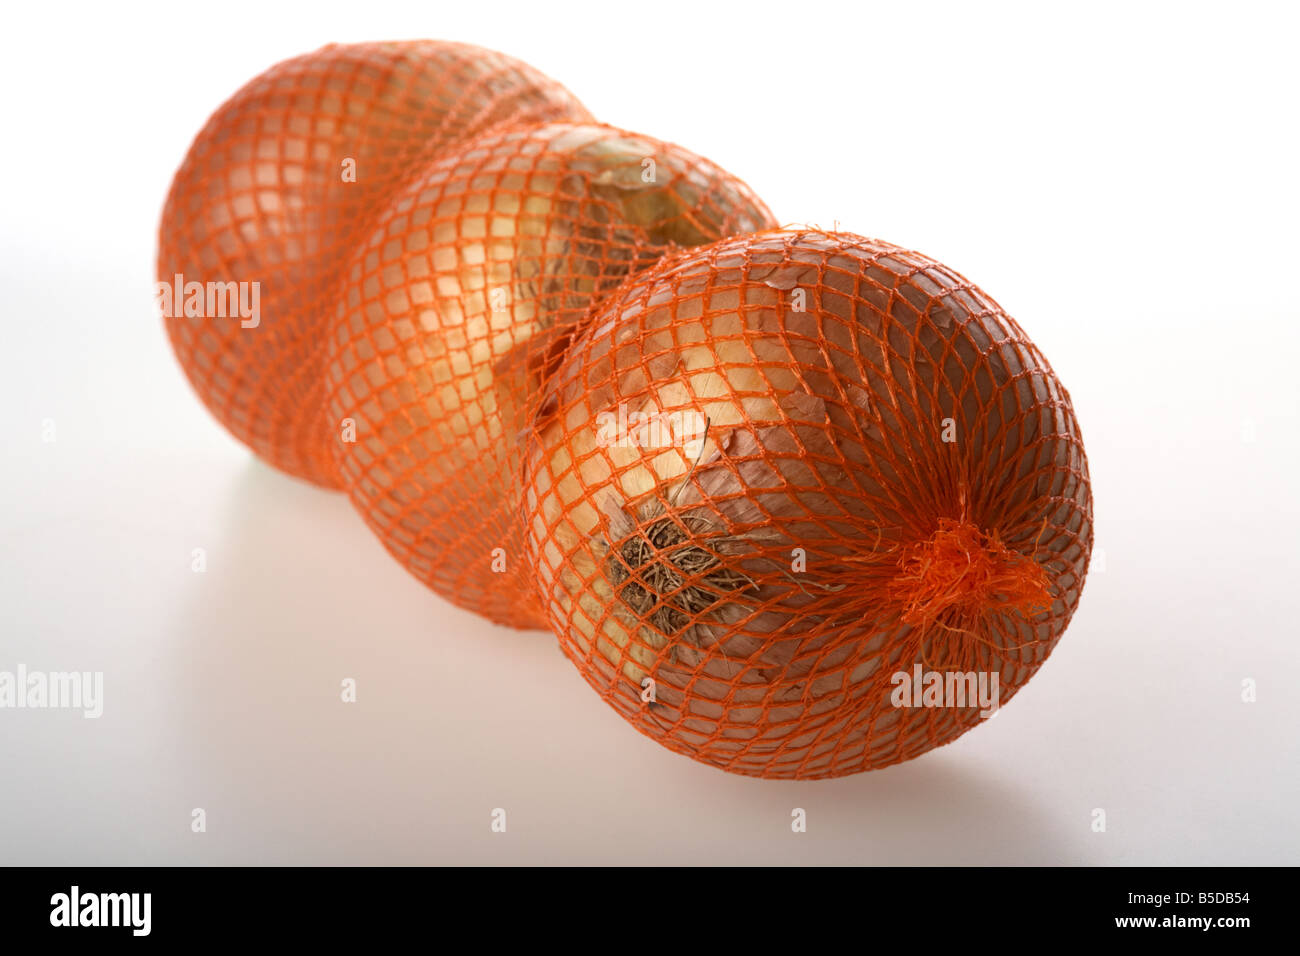 three large spanish onions in net packaging Stock Photo